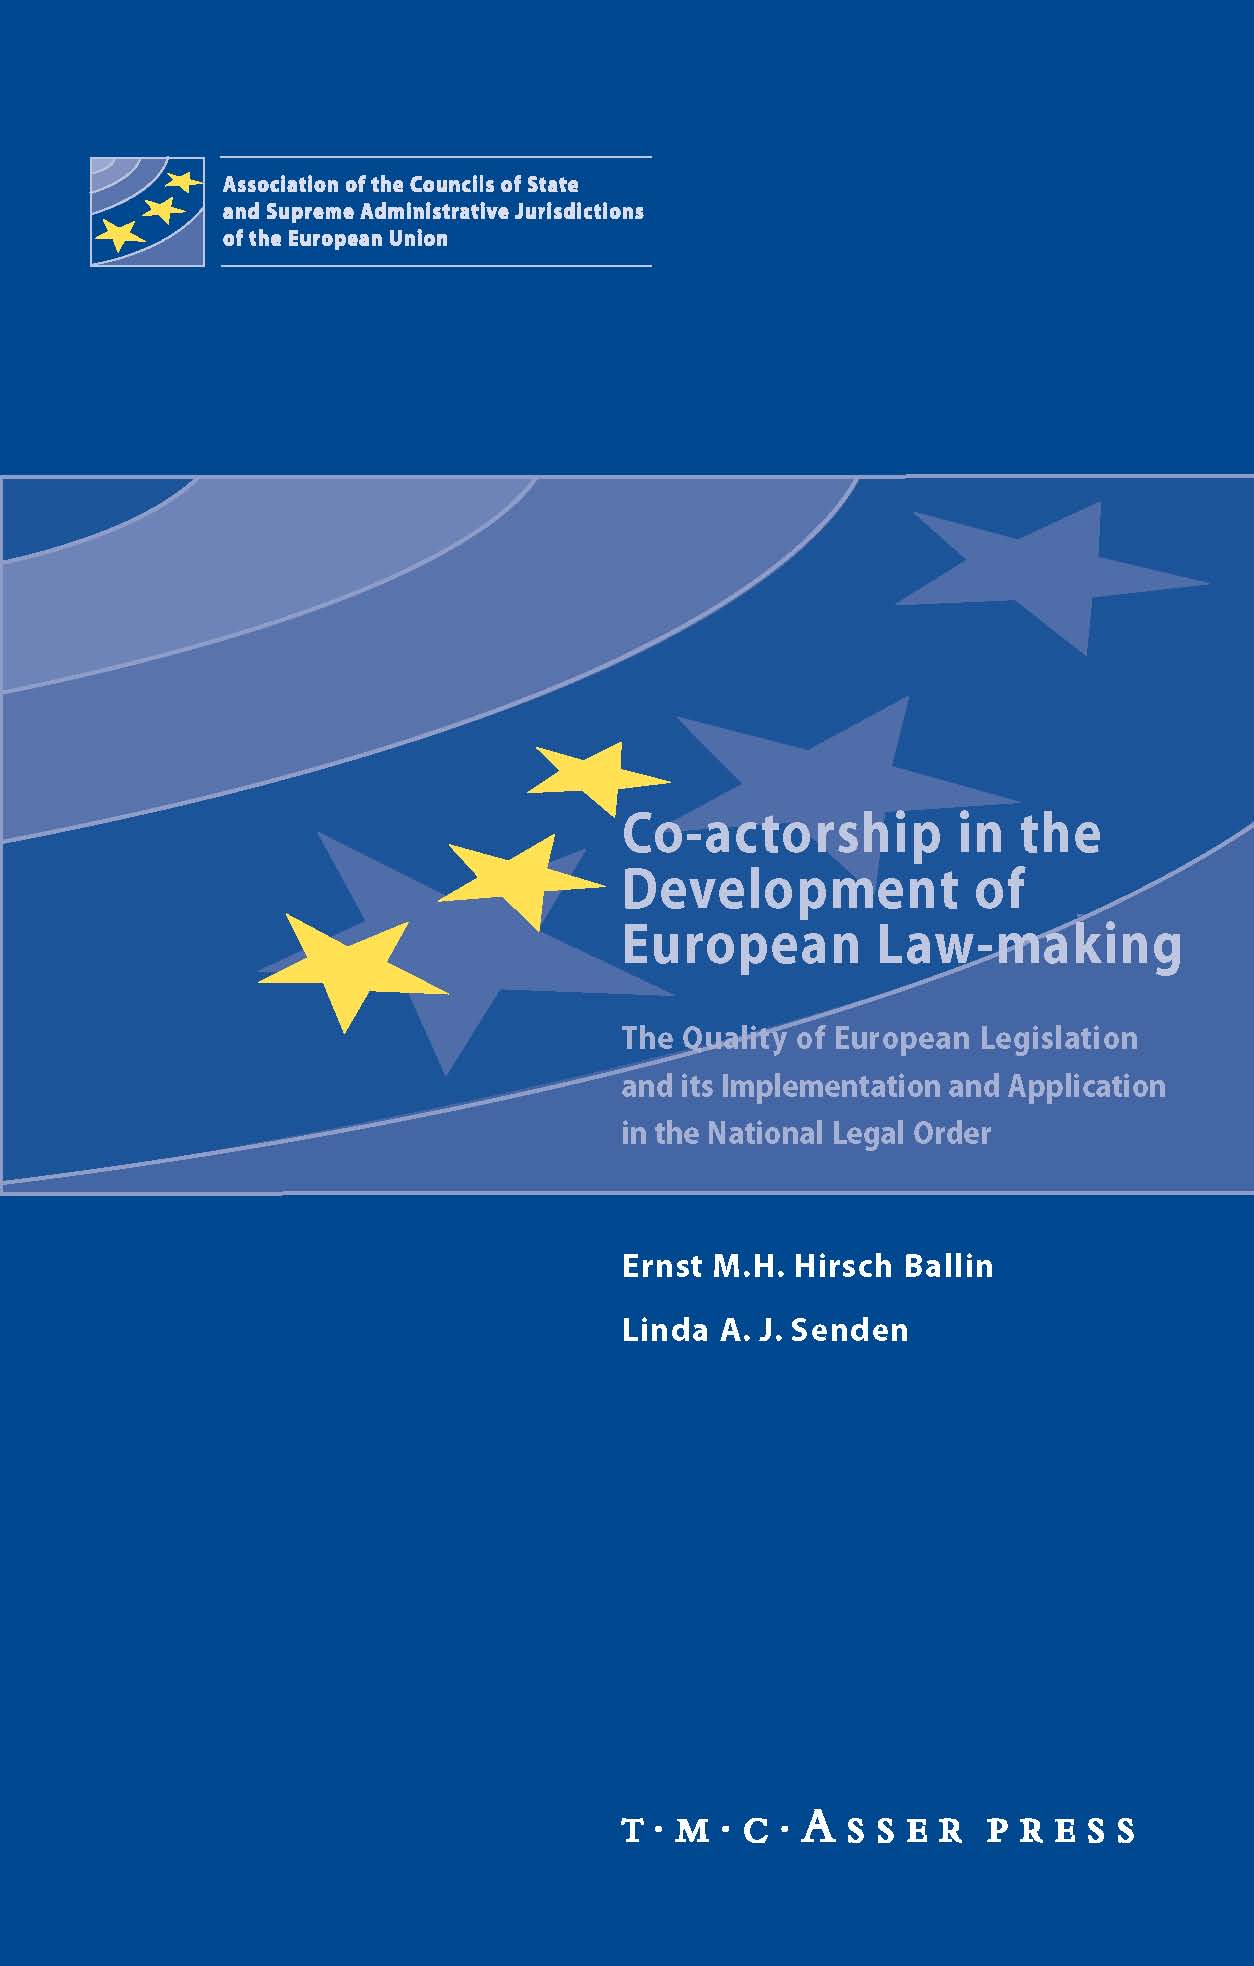 Co-actorship in the Development of European Law-Making - The Quality of European Legislation and its Implementation and Application in the National Legal Order